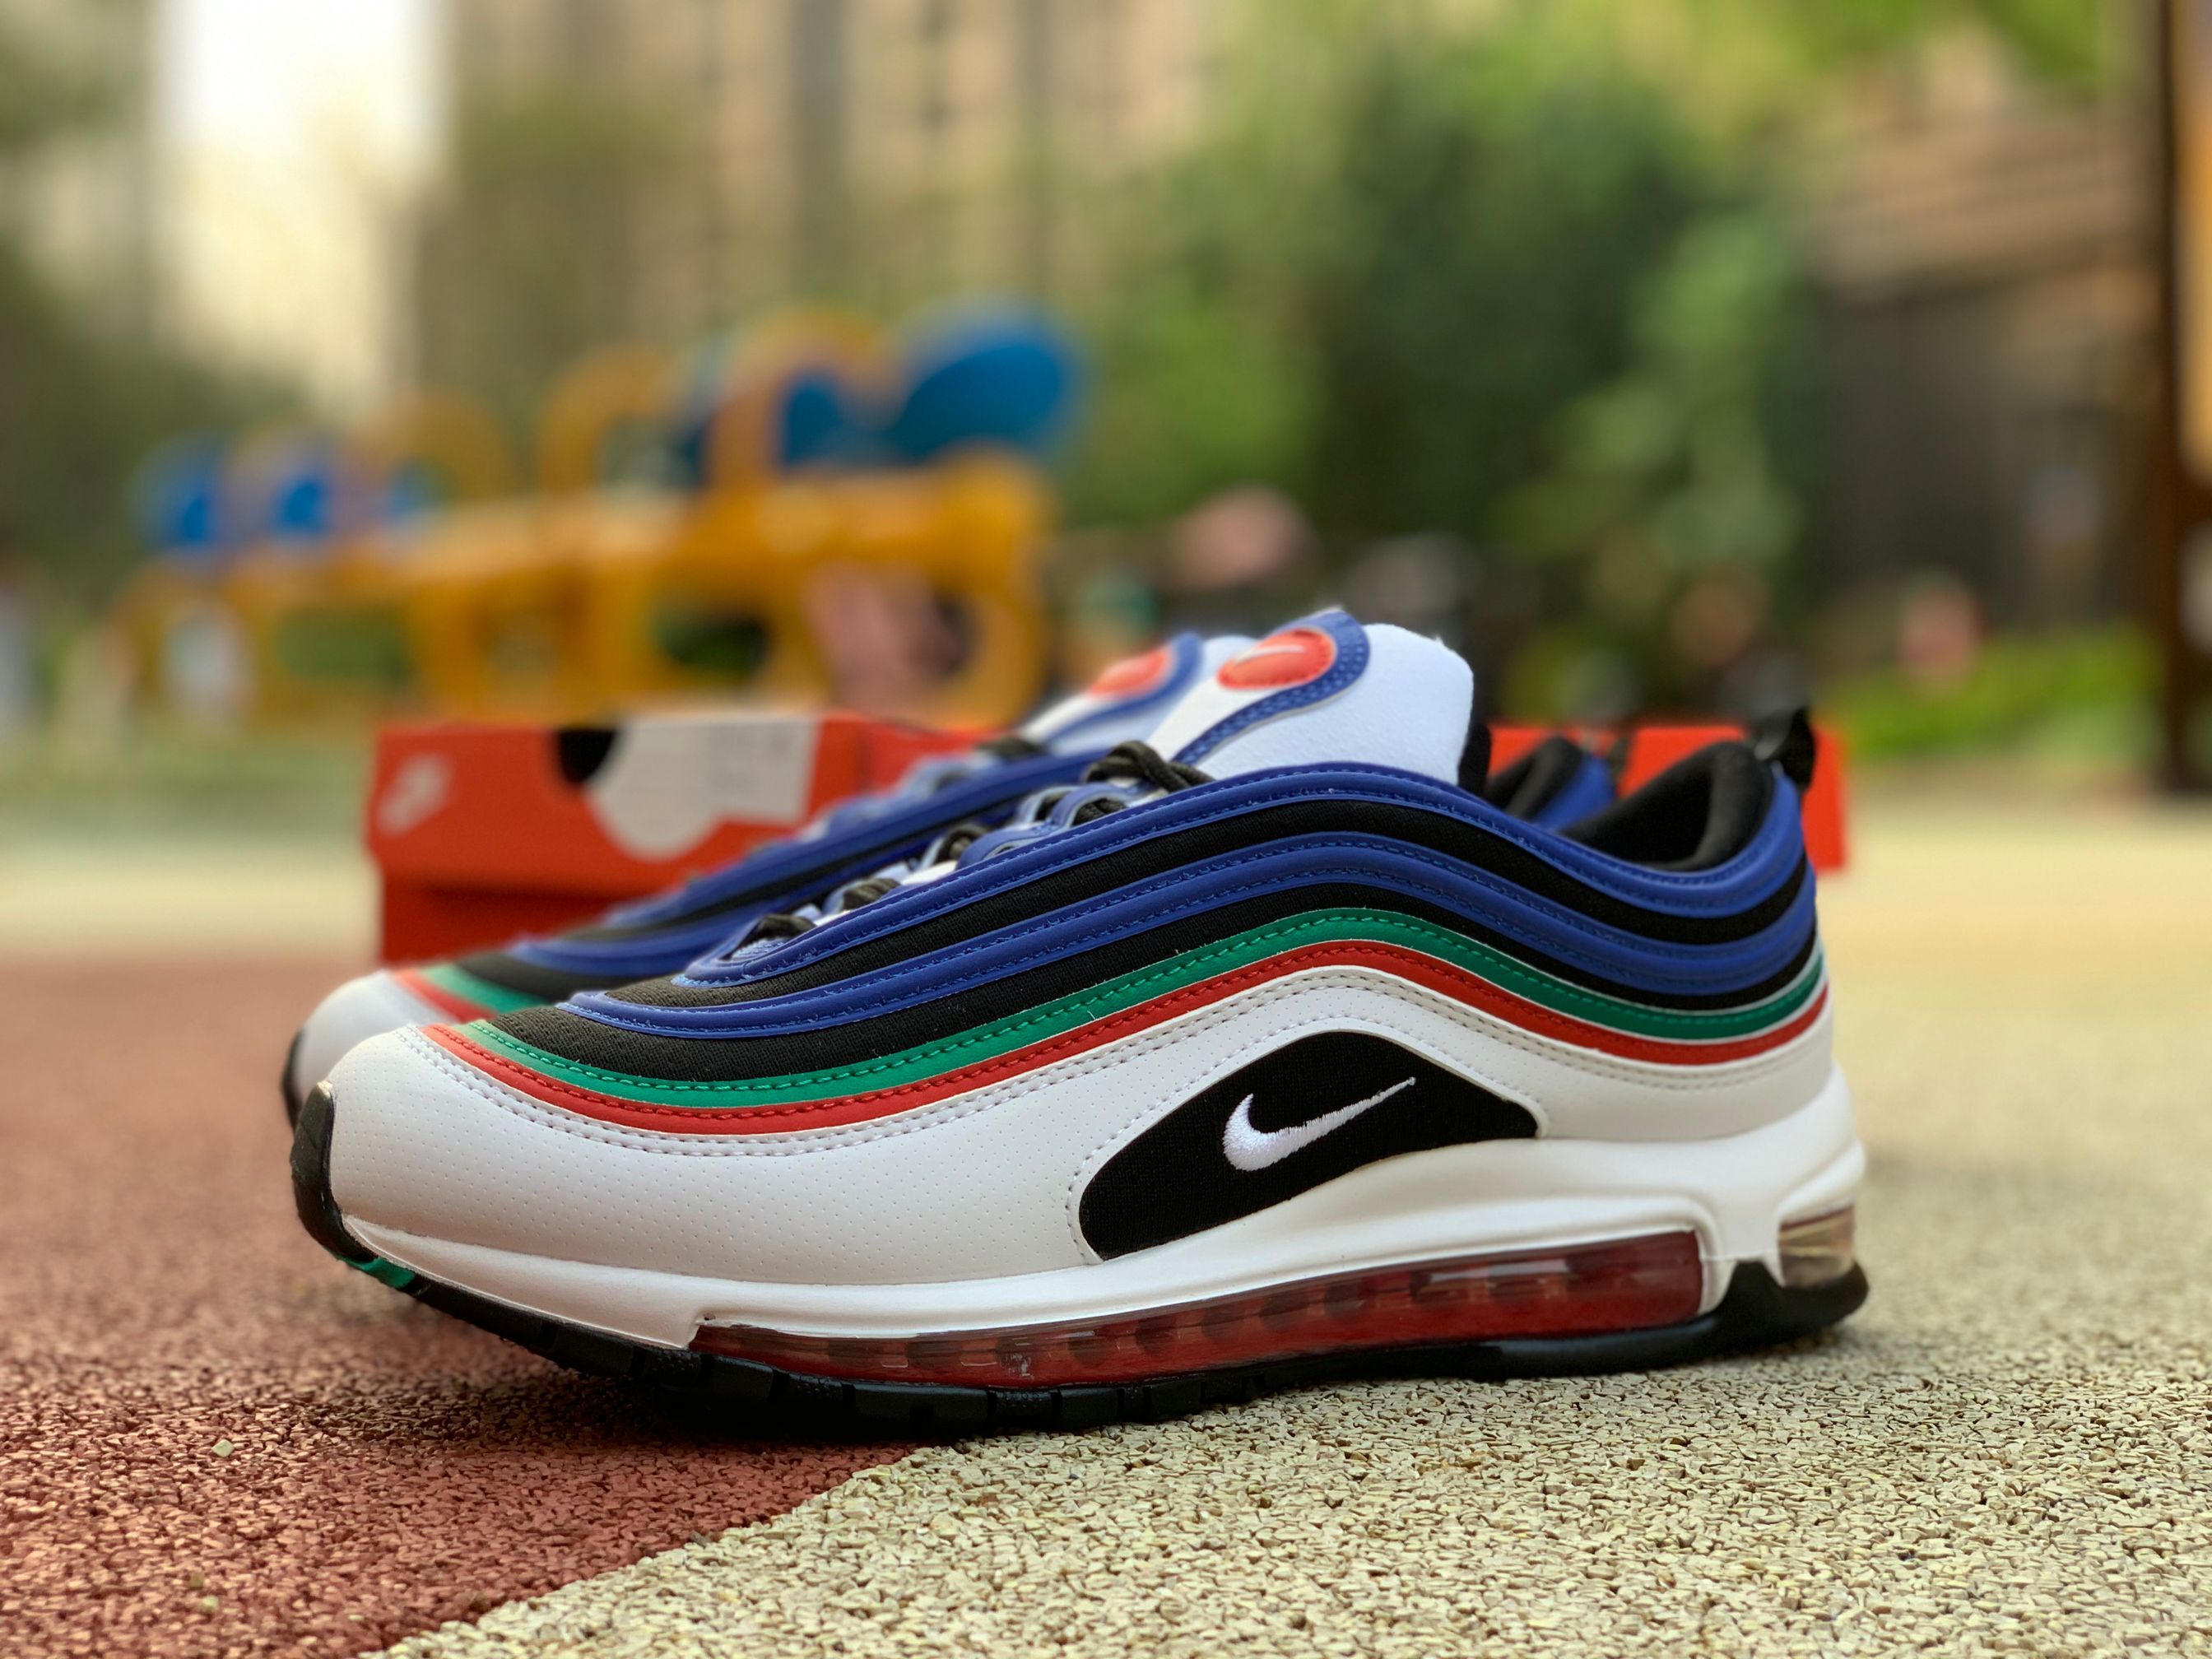 Latest Release Nike Air Max 97 Running Shoes White/MultiColor/Hyper